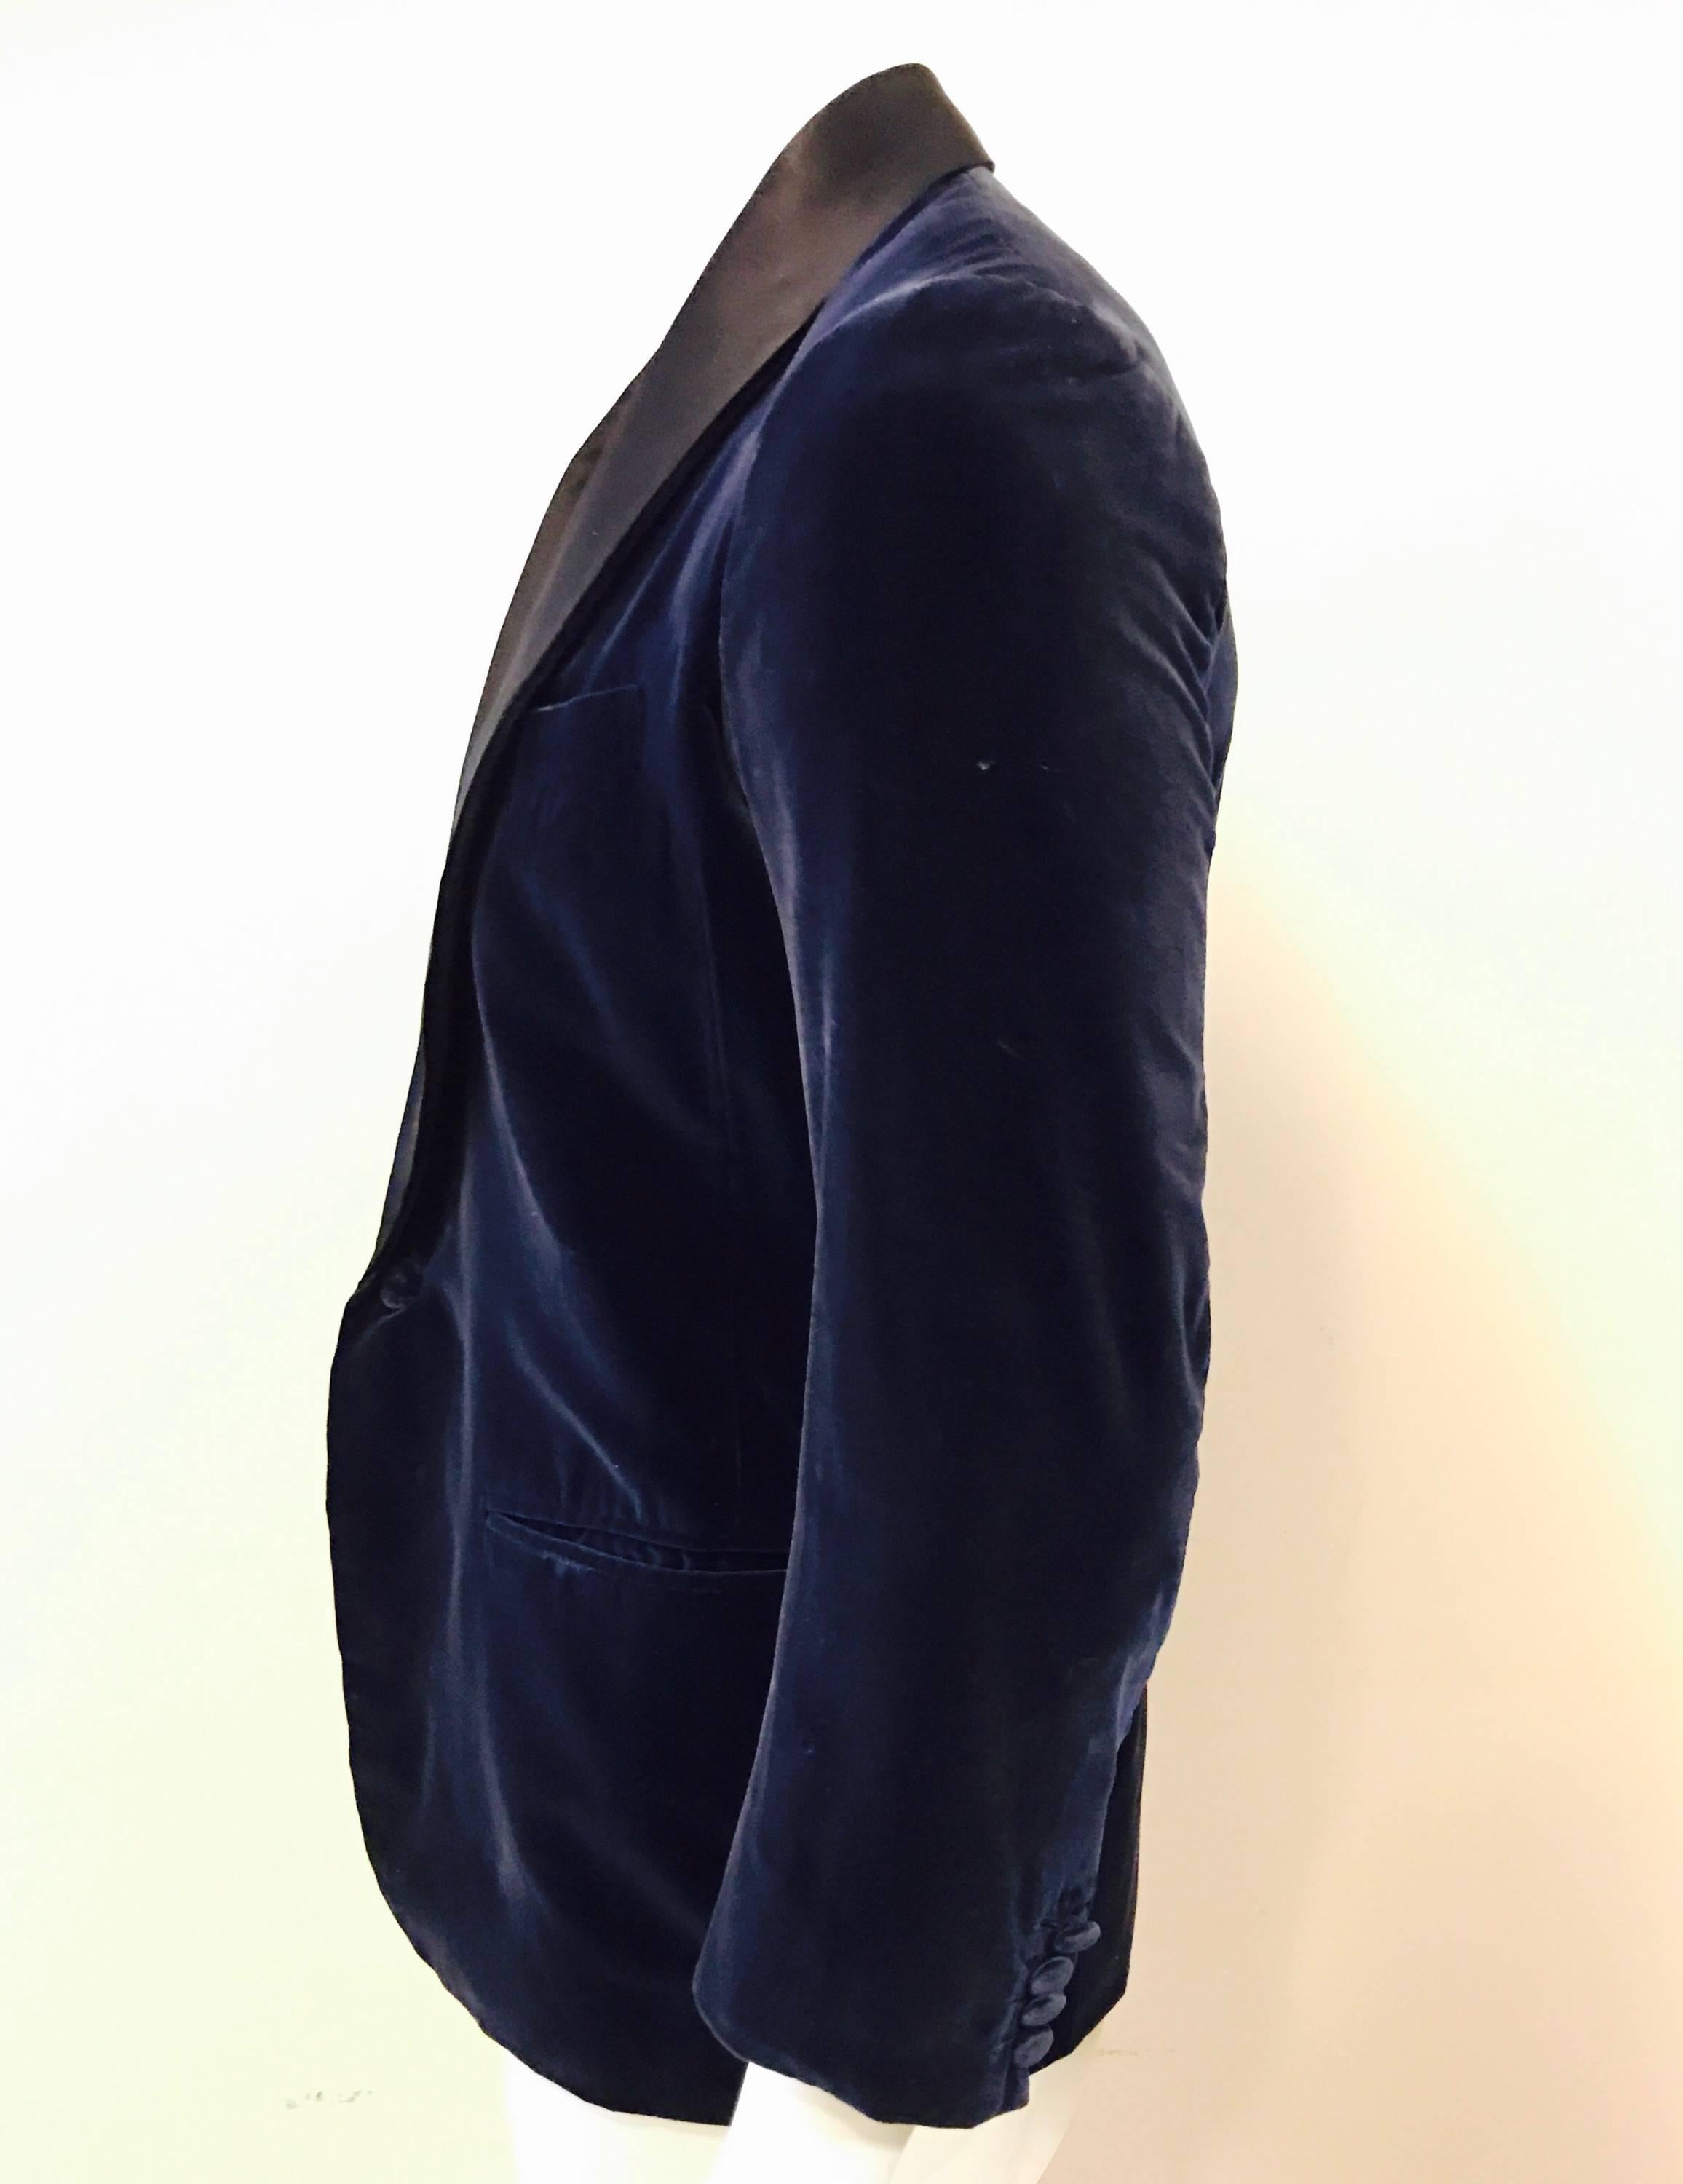 A fabulous vintage 1960's velvet smoking jacket made in Saville Row, London, by Anderson and Sheppard who have been in business since 1906.  Smooth cotton velvet, with a silk satin shawl collar in a sumptuous midnight blue.  One button close, four